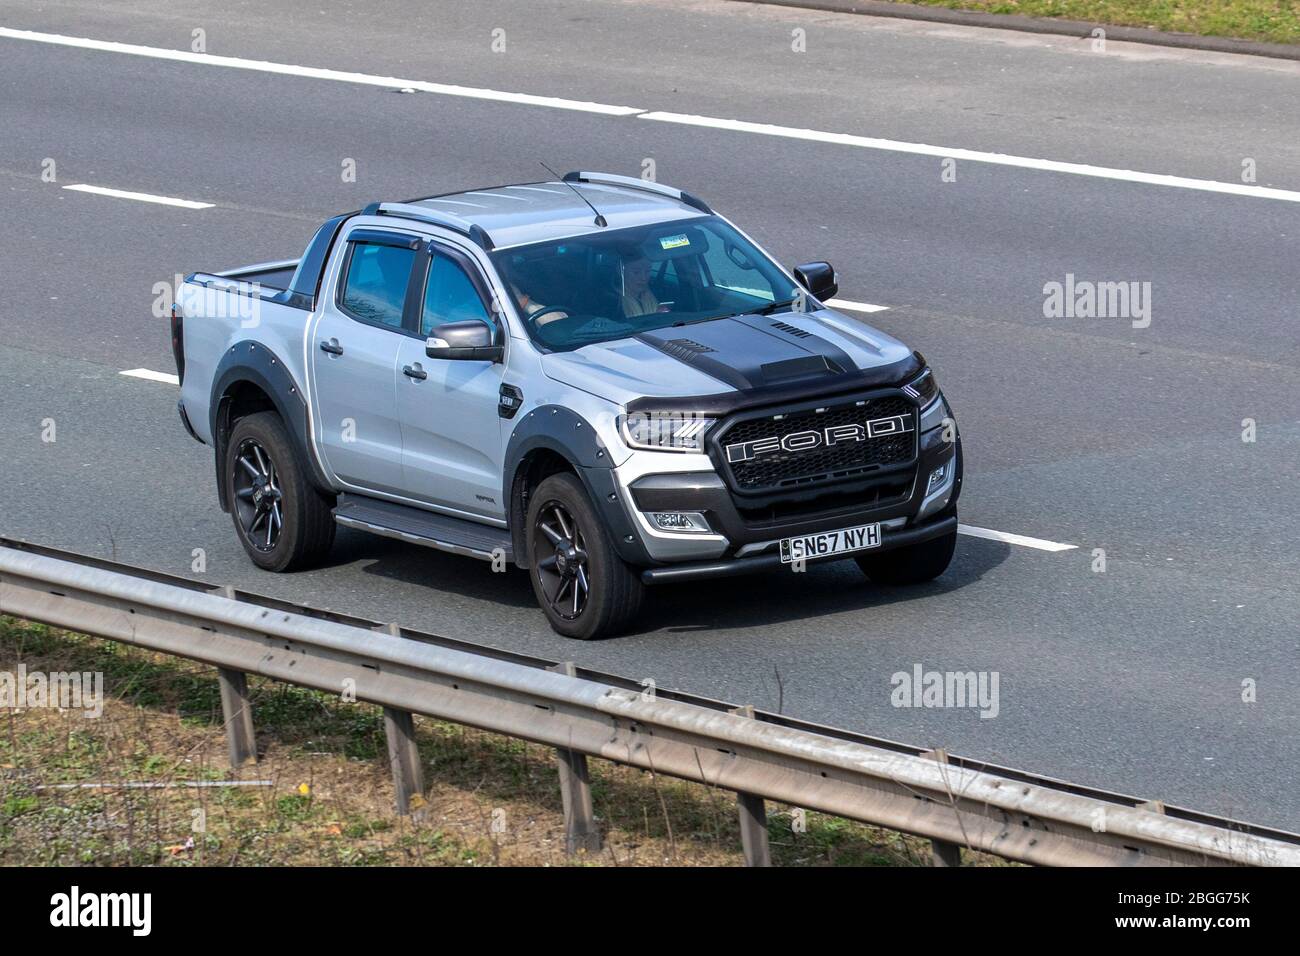 Ford Ranger Wildtrak High Resolution Stock Photography and Images - Alamy